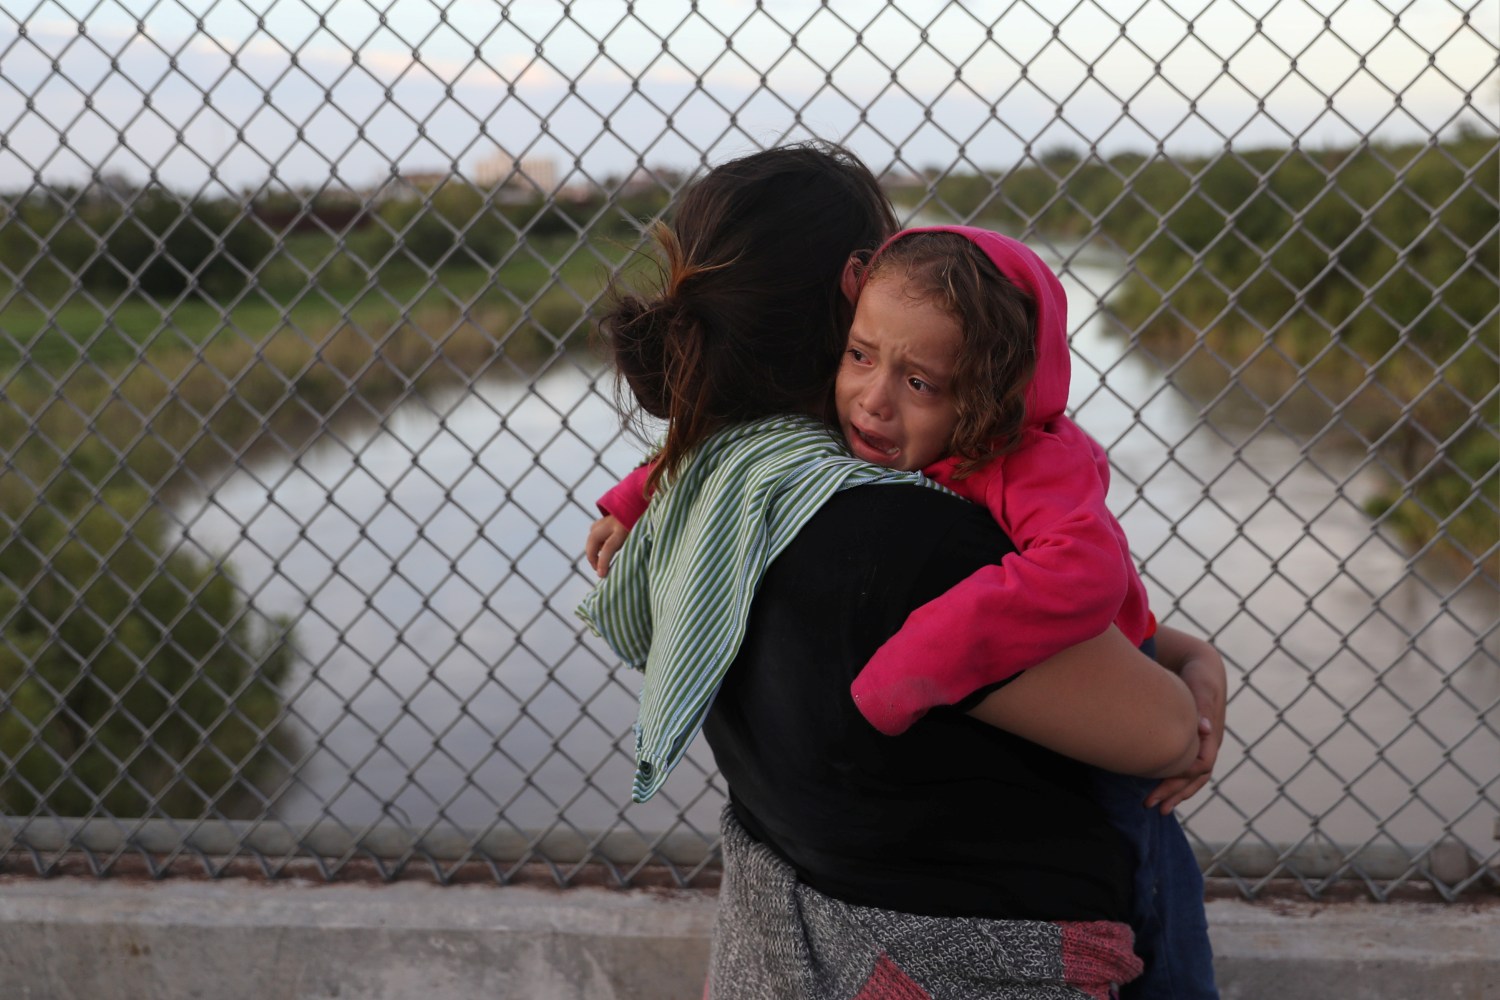 After being denied entry by U.S. Customs and Border Protection officers, an asylum seeking Honduran mother holds her crying 3-year-old daughter on the Mexican side of the Brownsville & Matamoros International Bridge near Brownsville, Texas, U.S., June 24, 2018. Picture taken June 24, 2018. REUTERS/Loren Elliott - RC1DAD0FC2D0